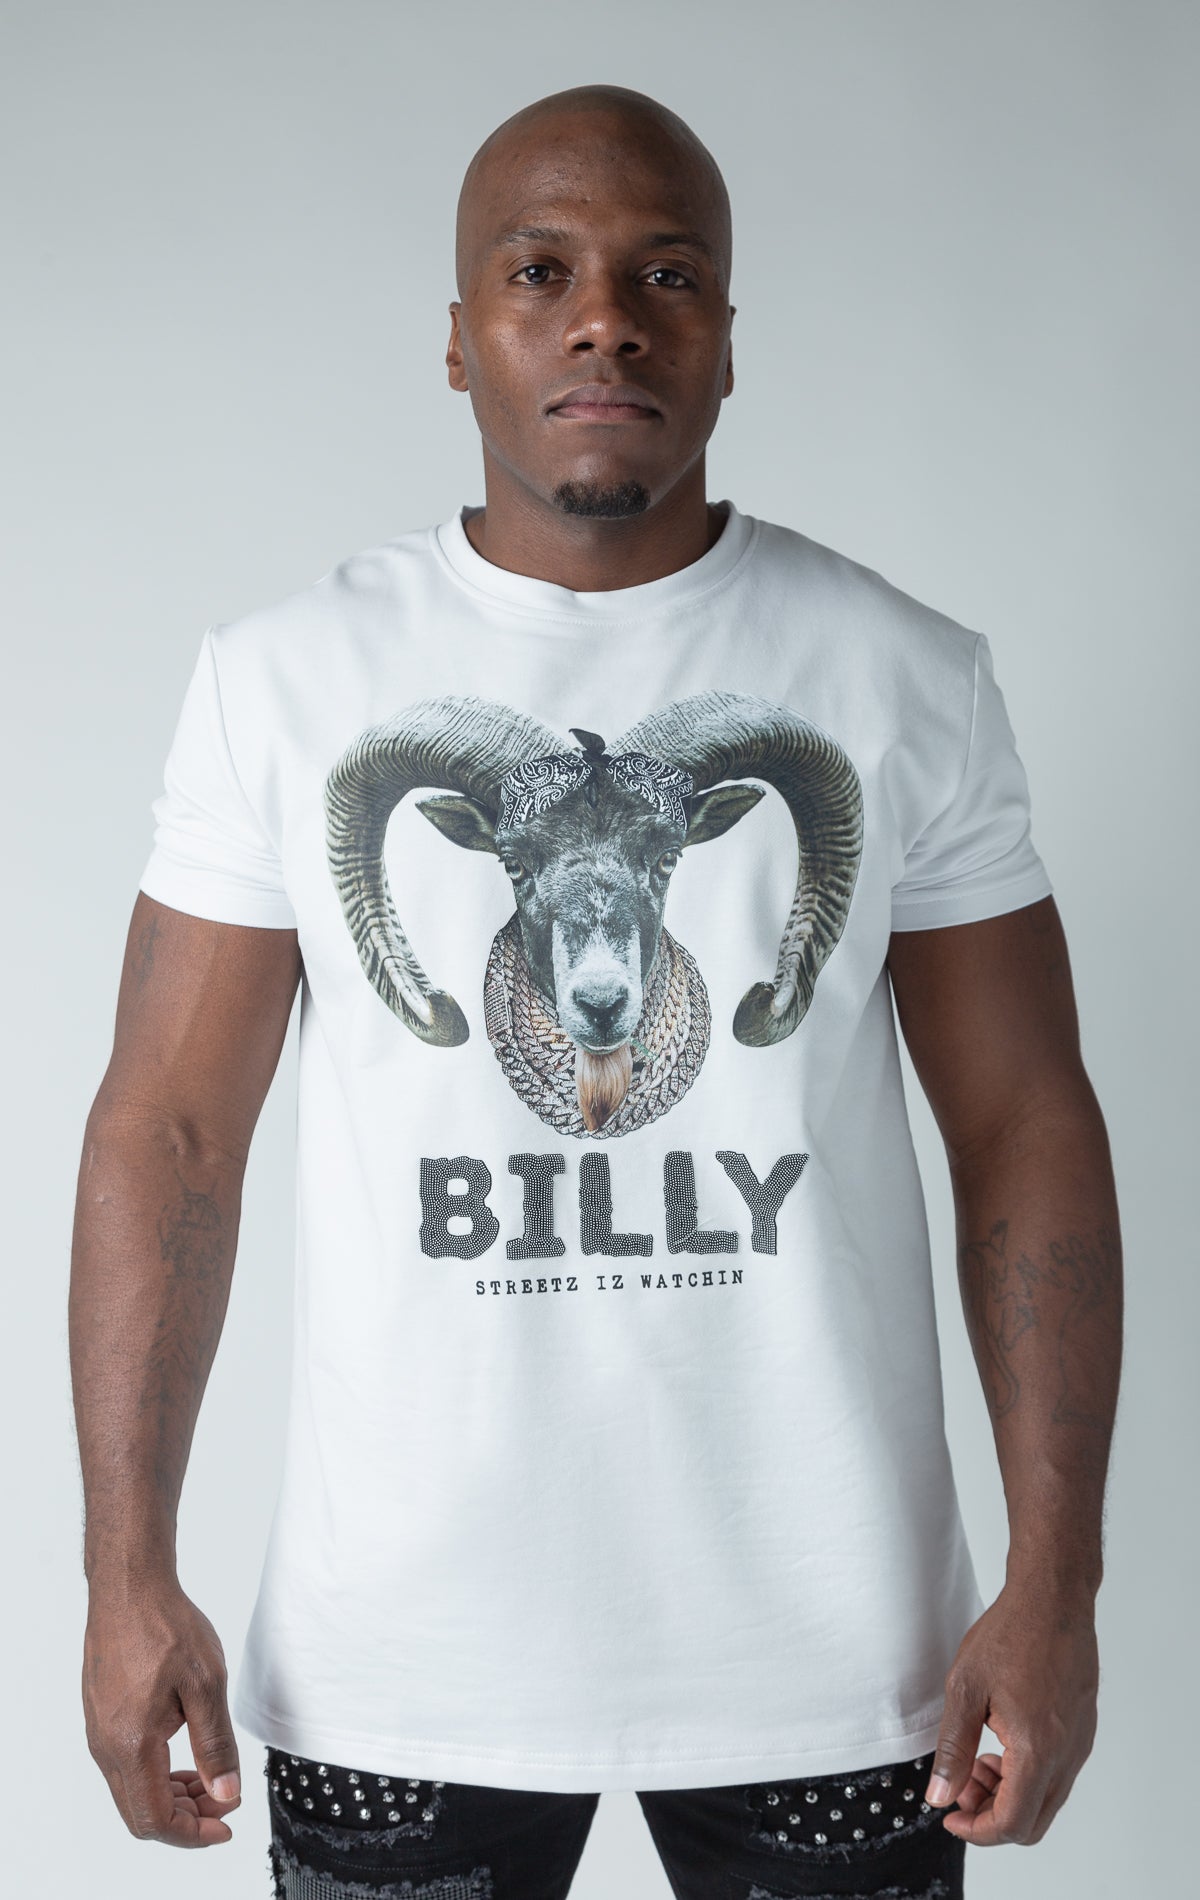 Billy graphic t-shirt.